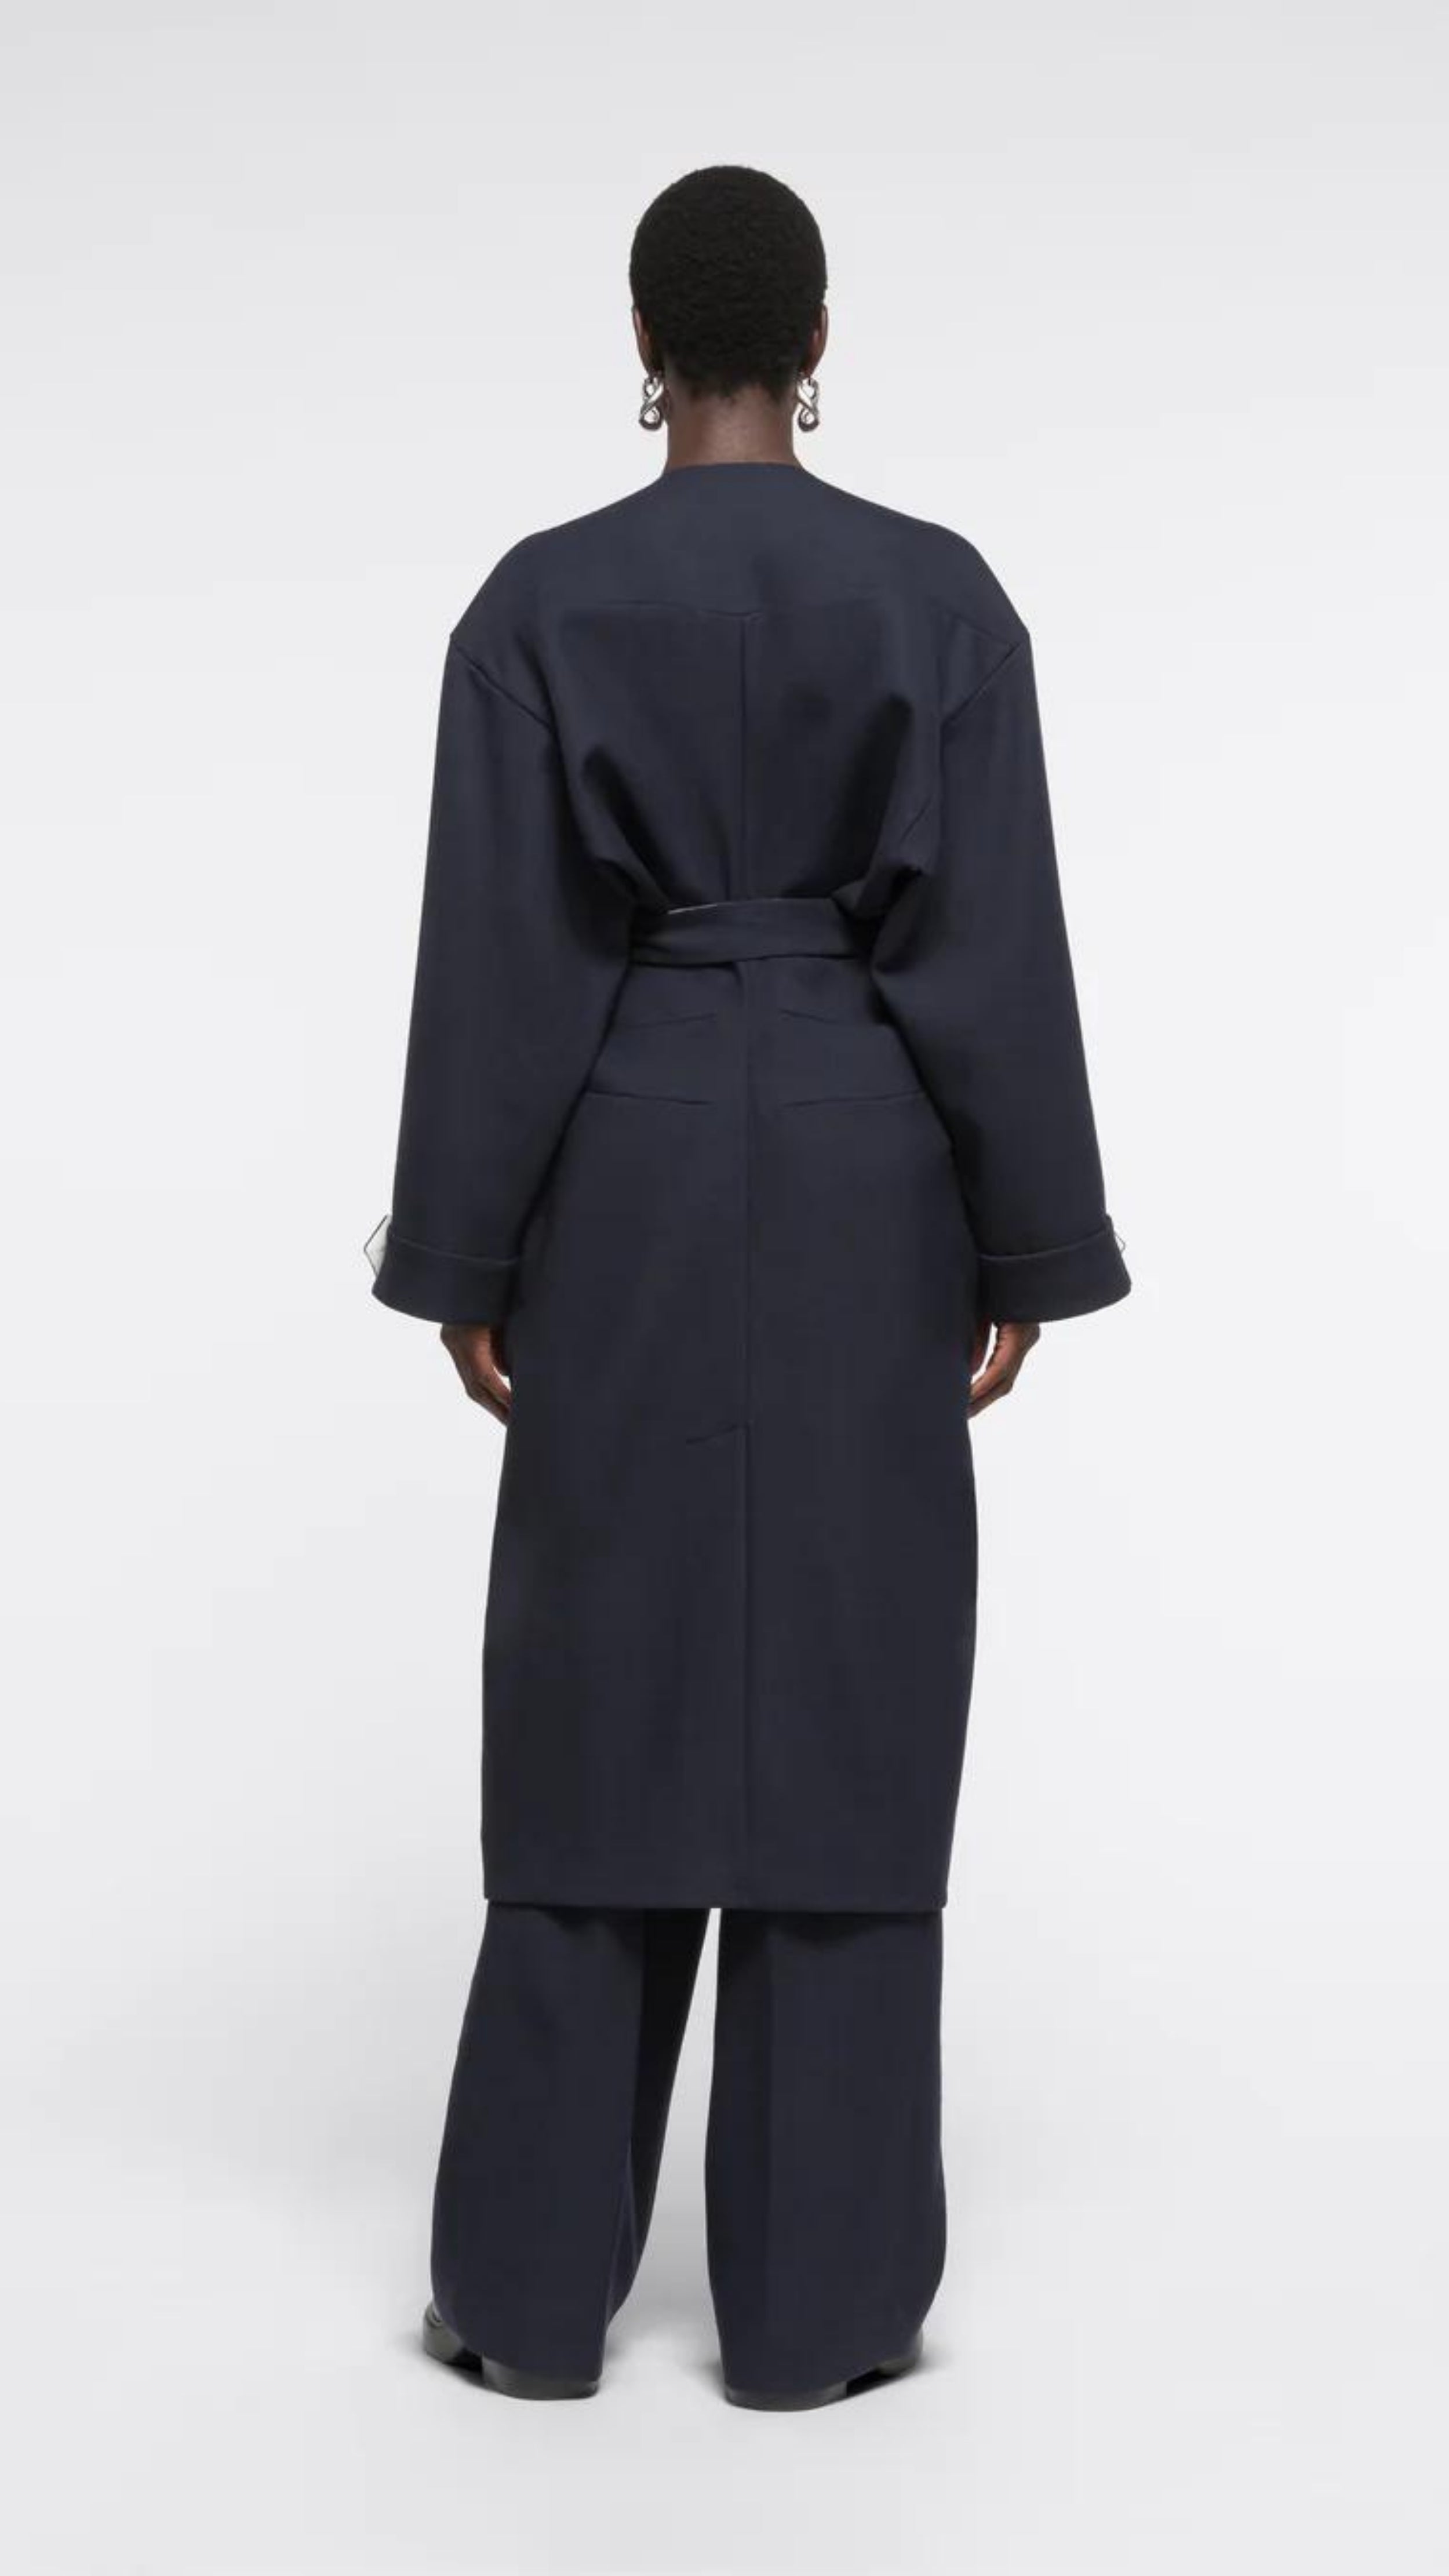 AZ Factory Colville Molly Molloy Lucinda Chambers, Draped Wool Coat in Navy. Wrap around wool coat made in Italy in navy blue. It has an ecru lining and can be worn open or belted for a more fitted style. Shown on model from the back.